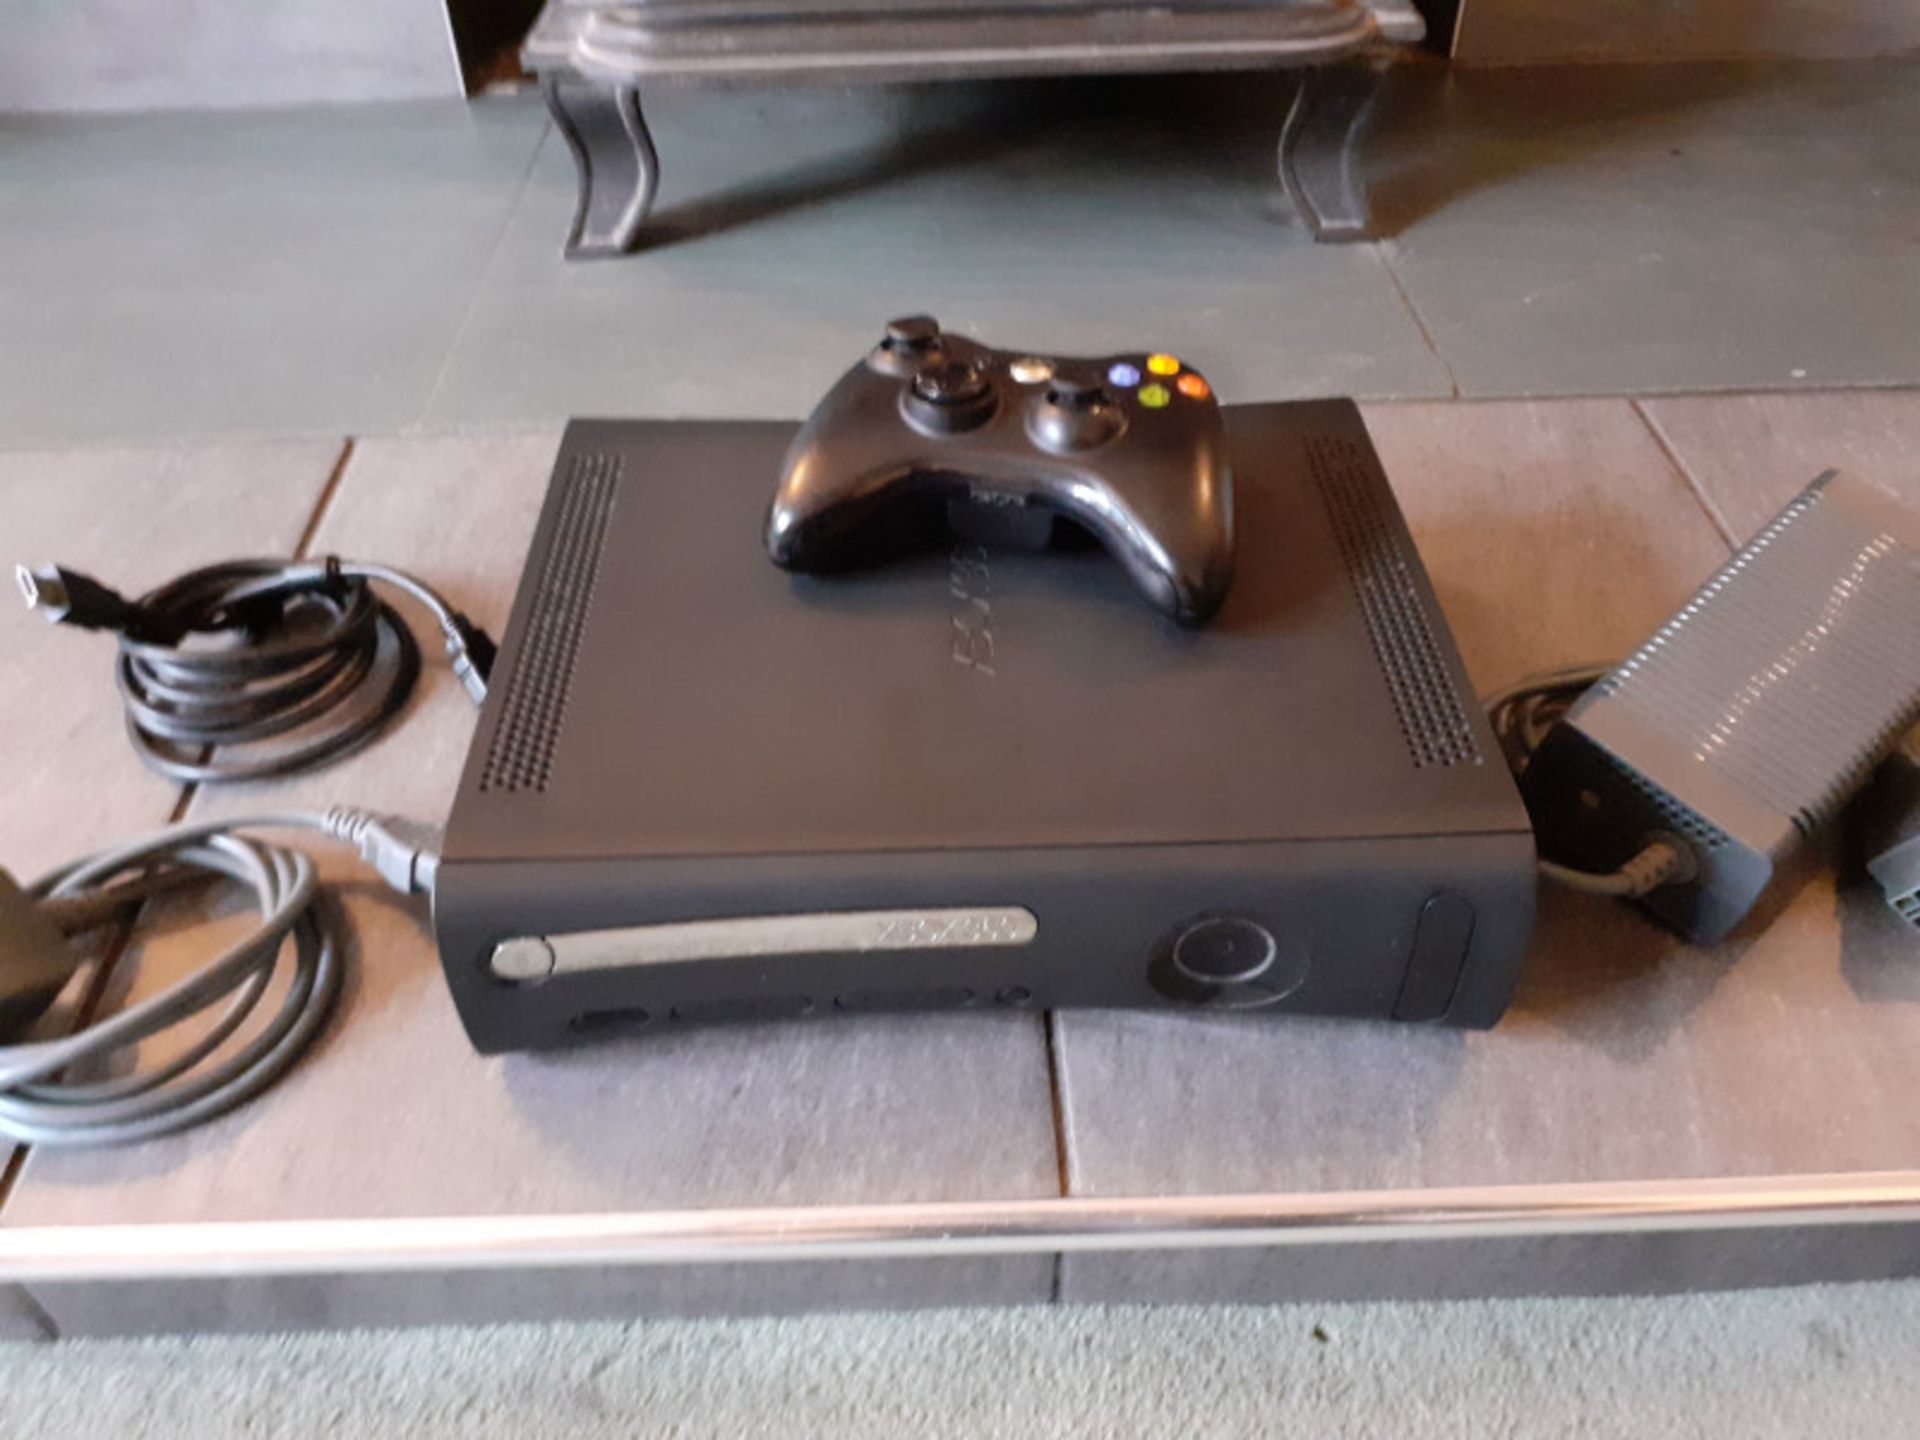 Xbox 360 games console with controller, power lead, HDMI cable (no hard drive)